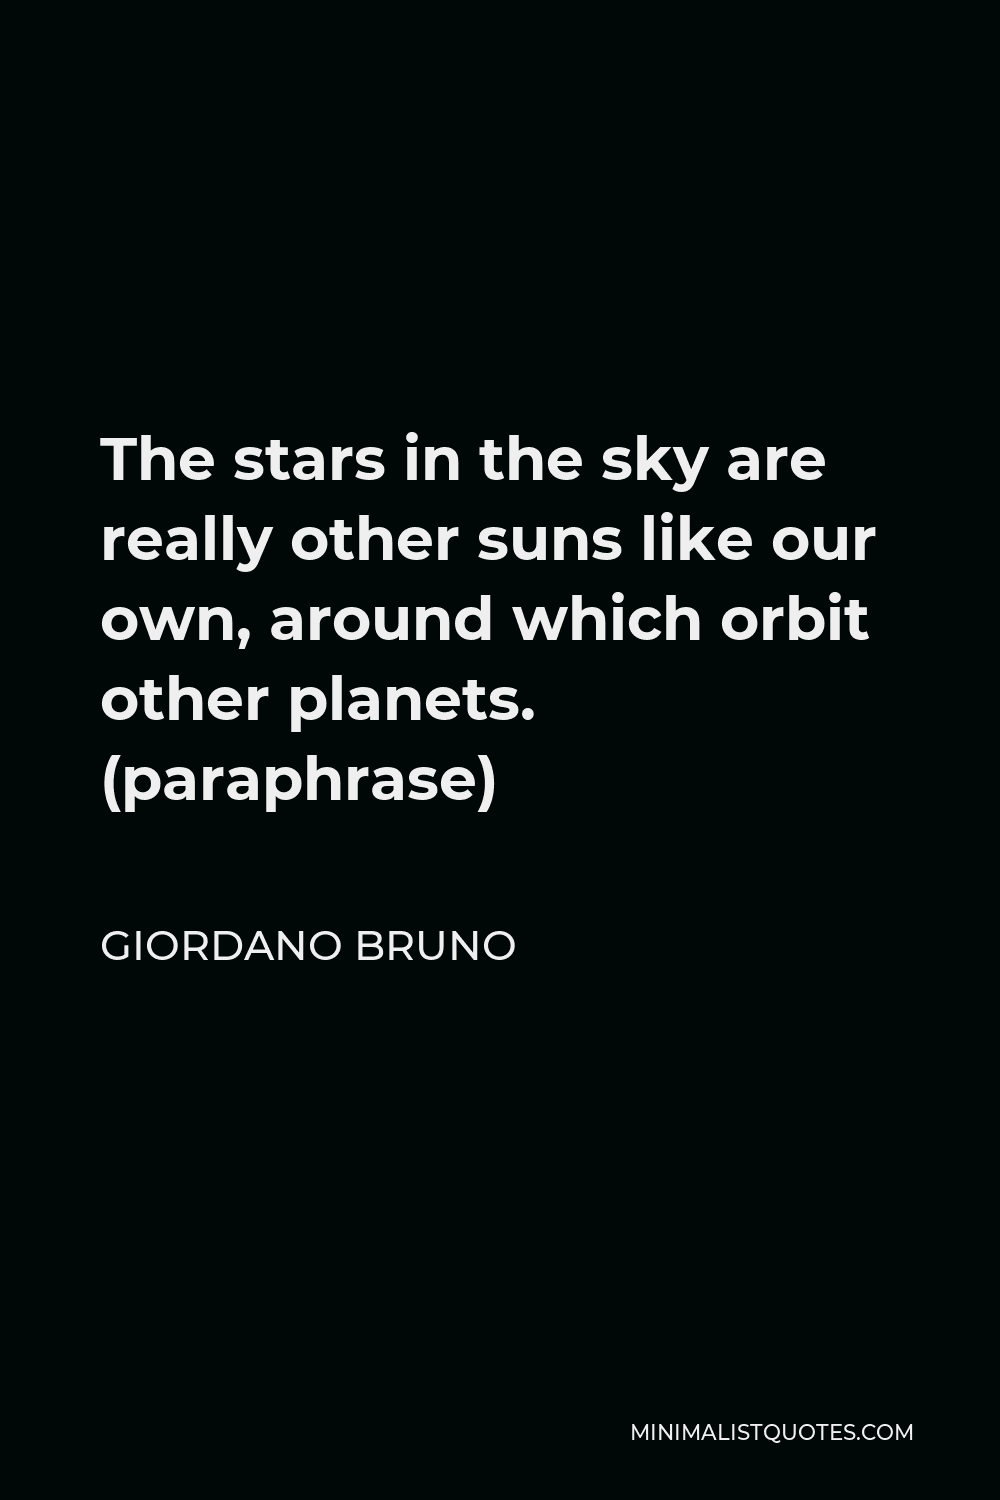 Giordano Bruno Quote - The stars in the sky are really other suns like our own, around which orbit other planets. (paraphrase)